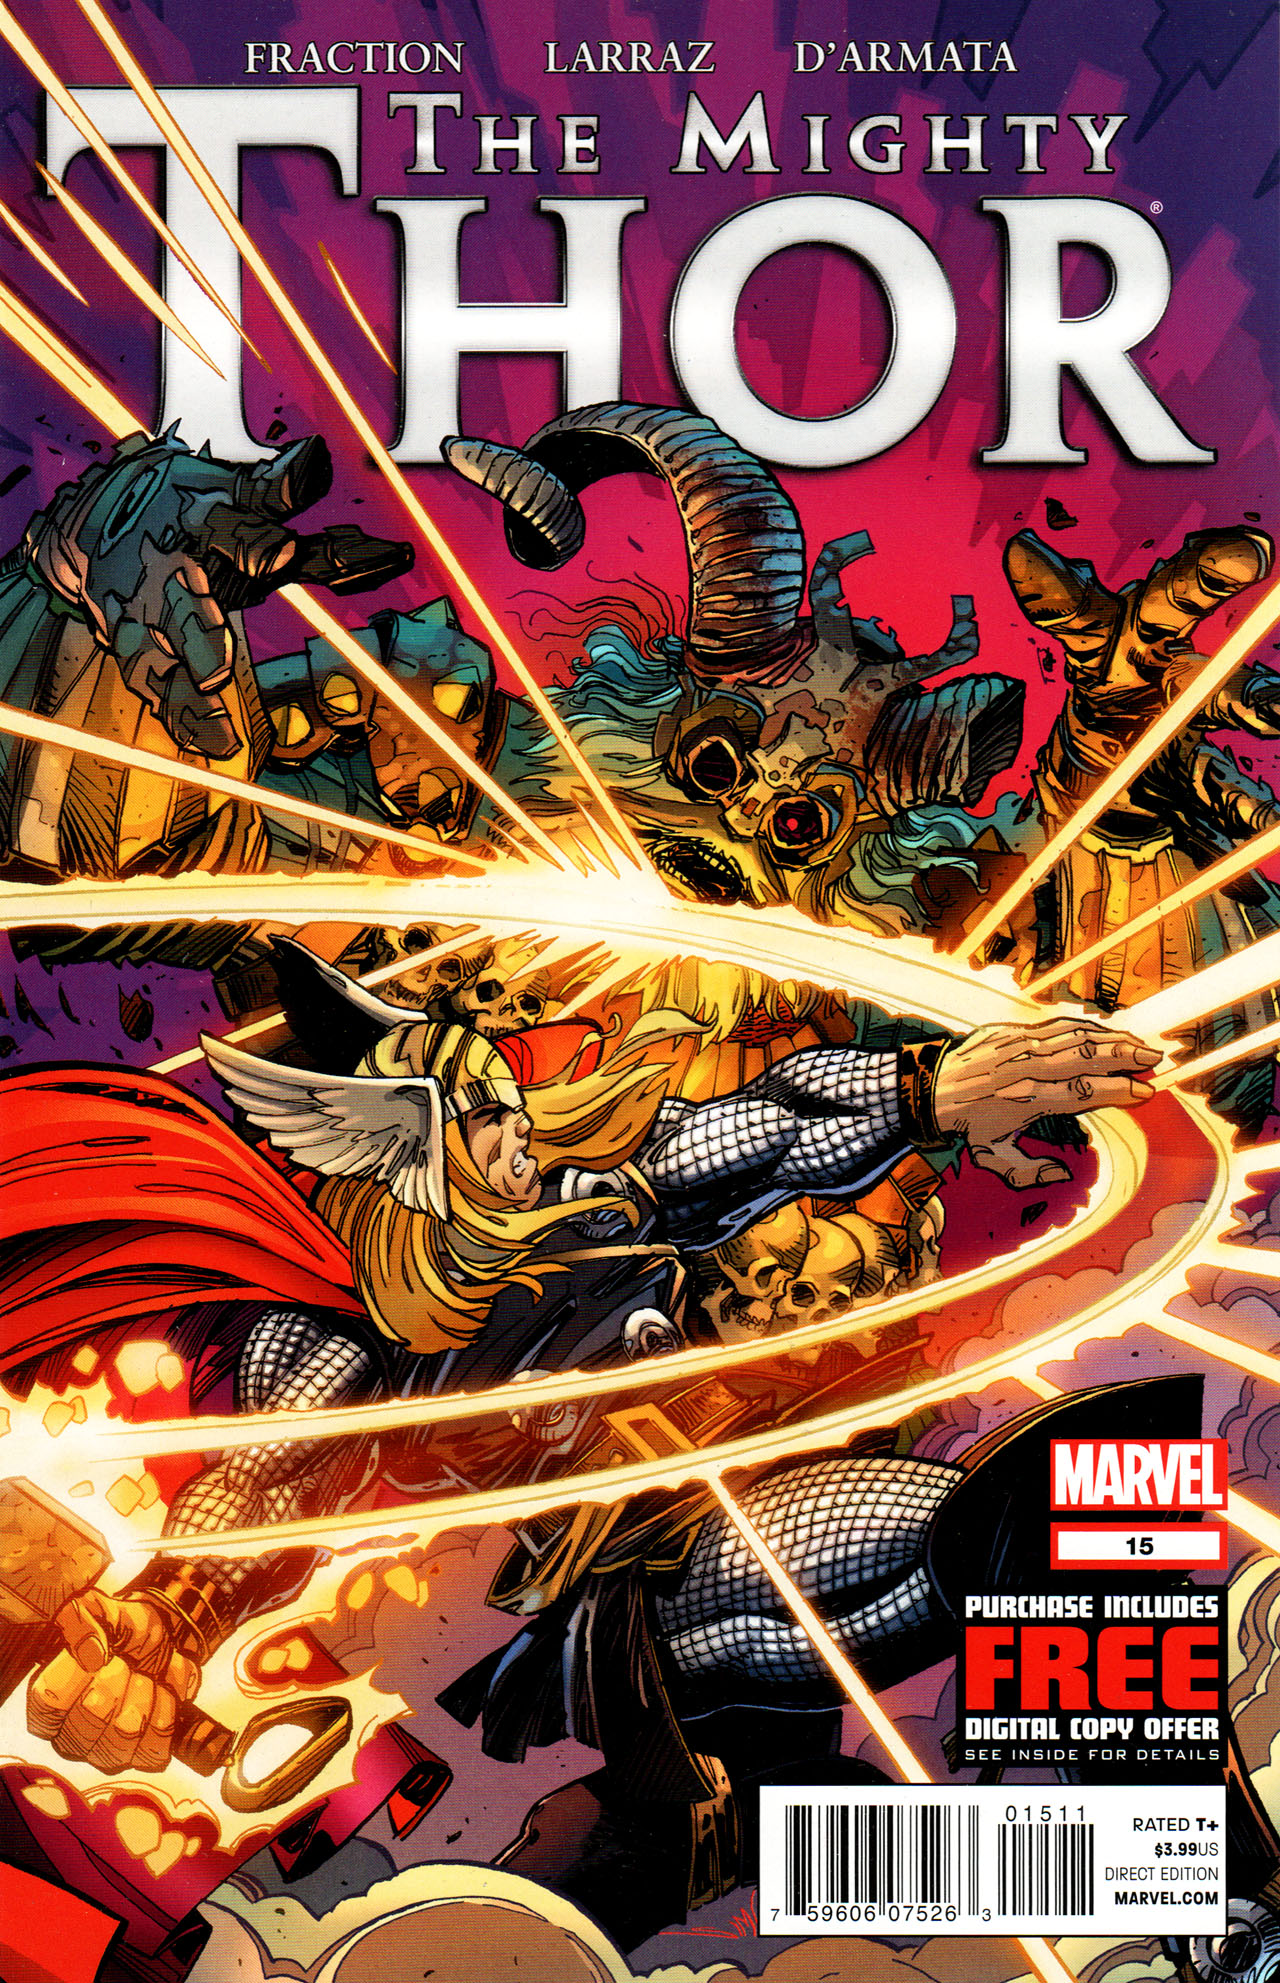 The Mighty Thor, Vol. 1 by Jason Aaron